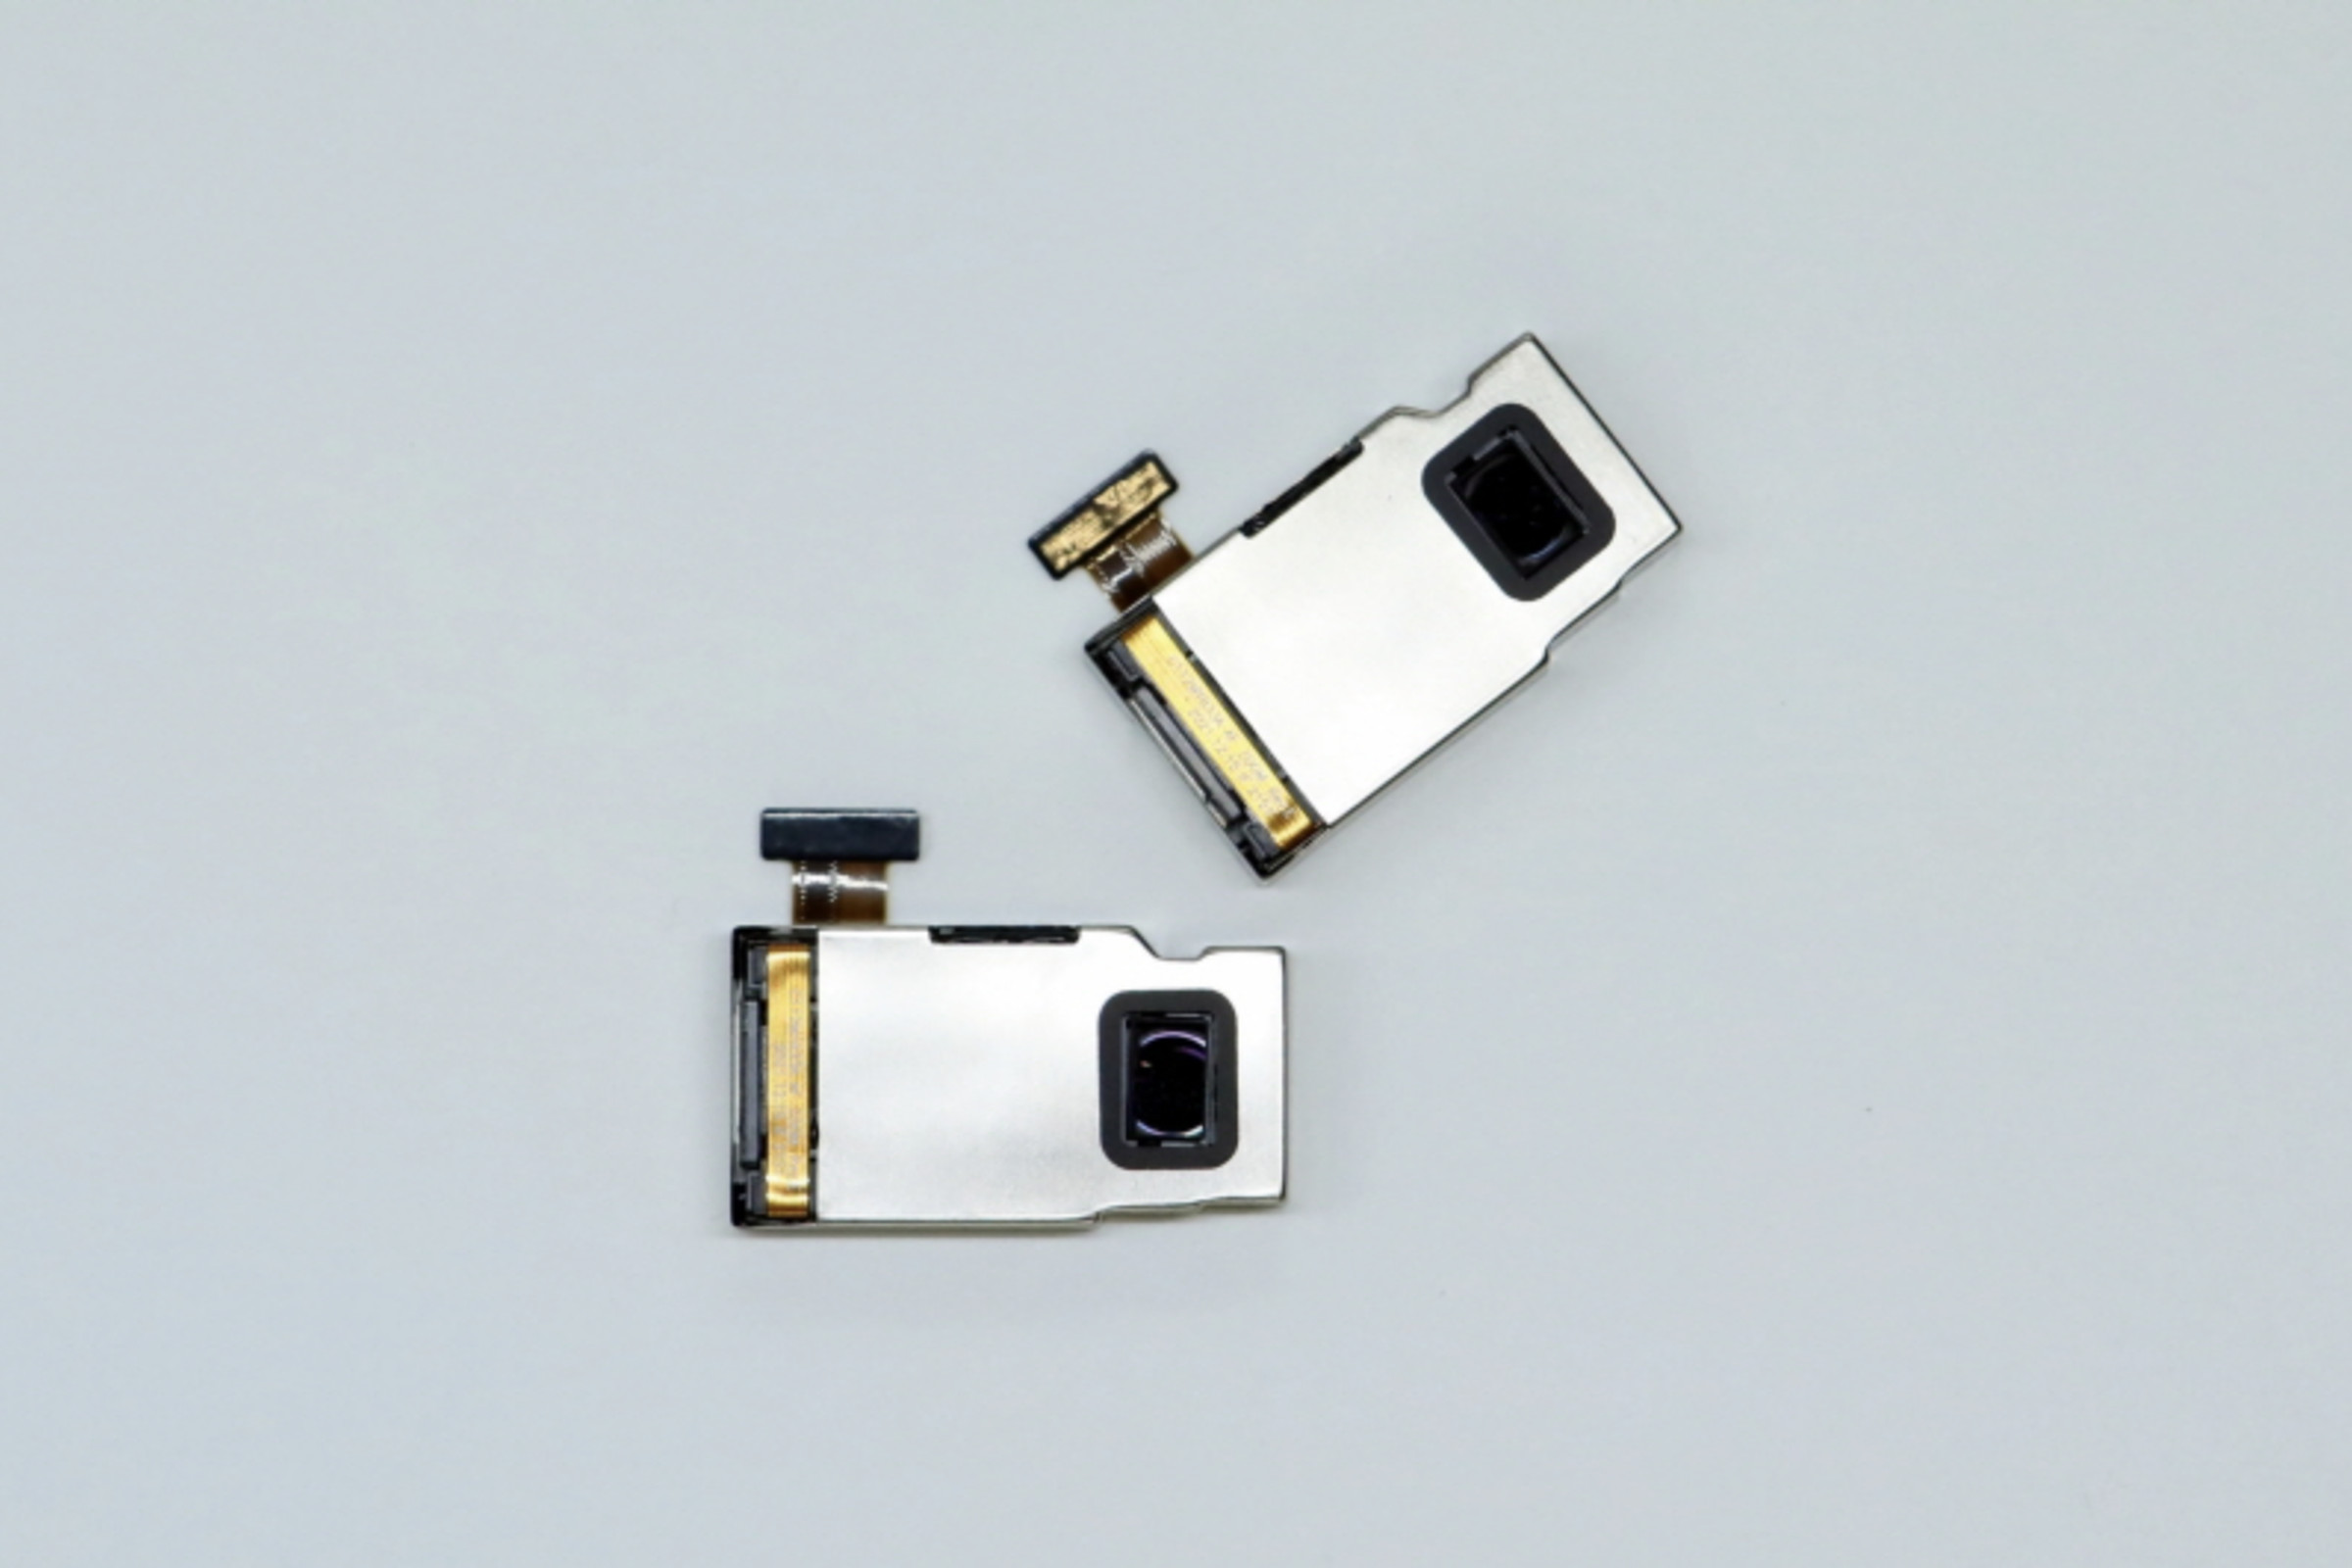 The camera module uses a tiny, precise actuator to move the lens between 4x and 9x telephoto settings.